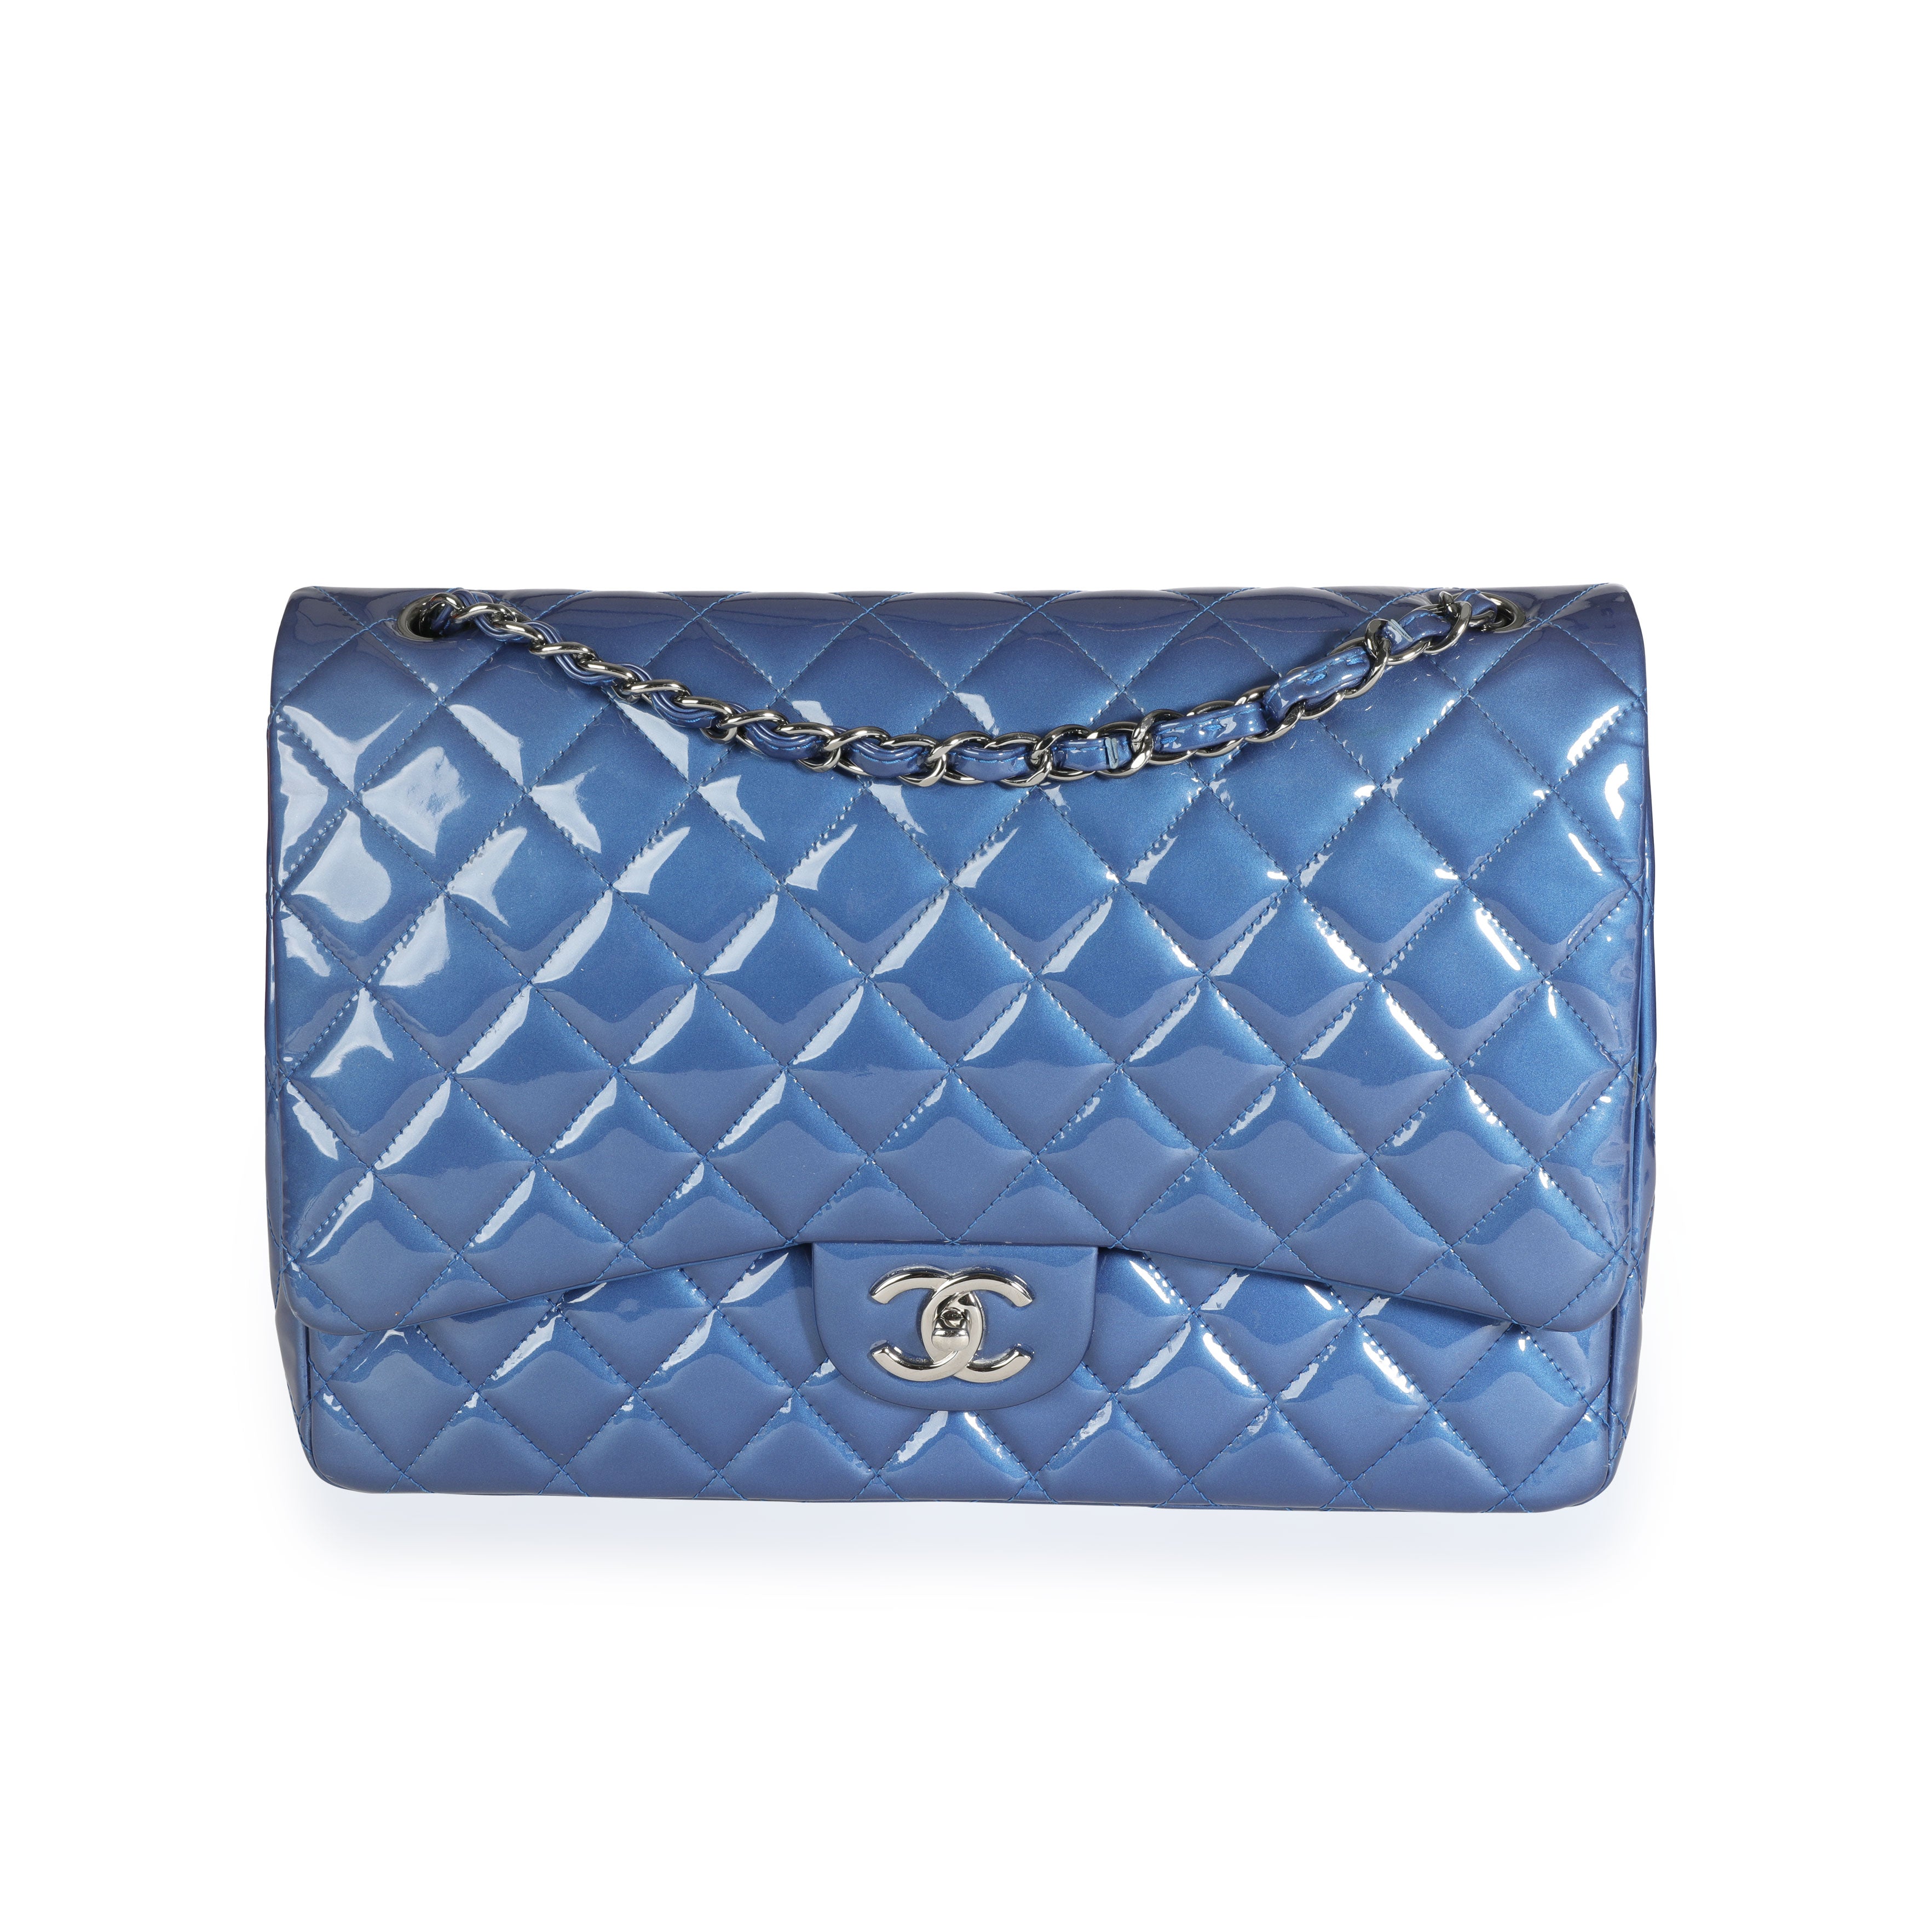 Chanel Blue Patent Leather Quilted Maxi Classic Double Flap Bag by